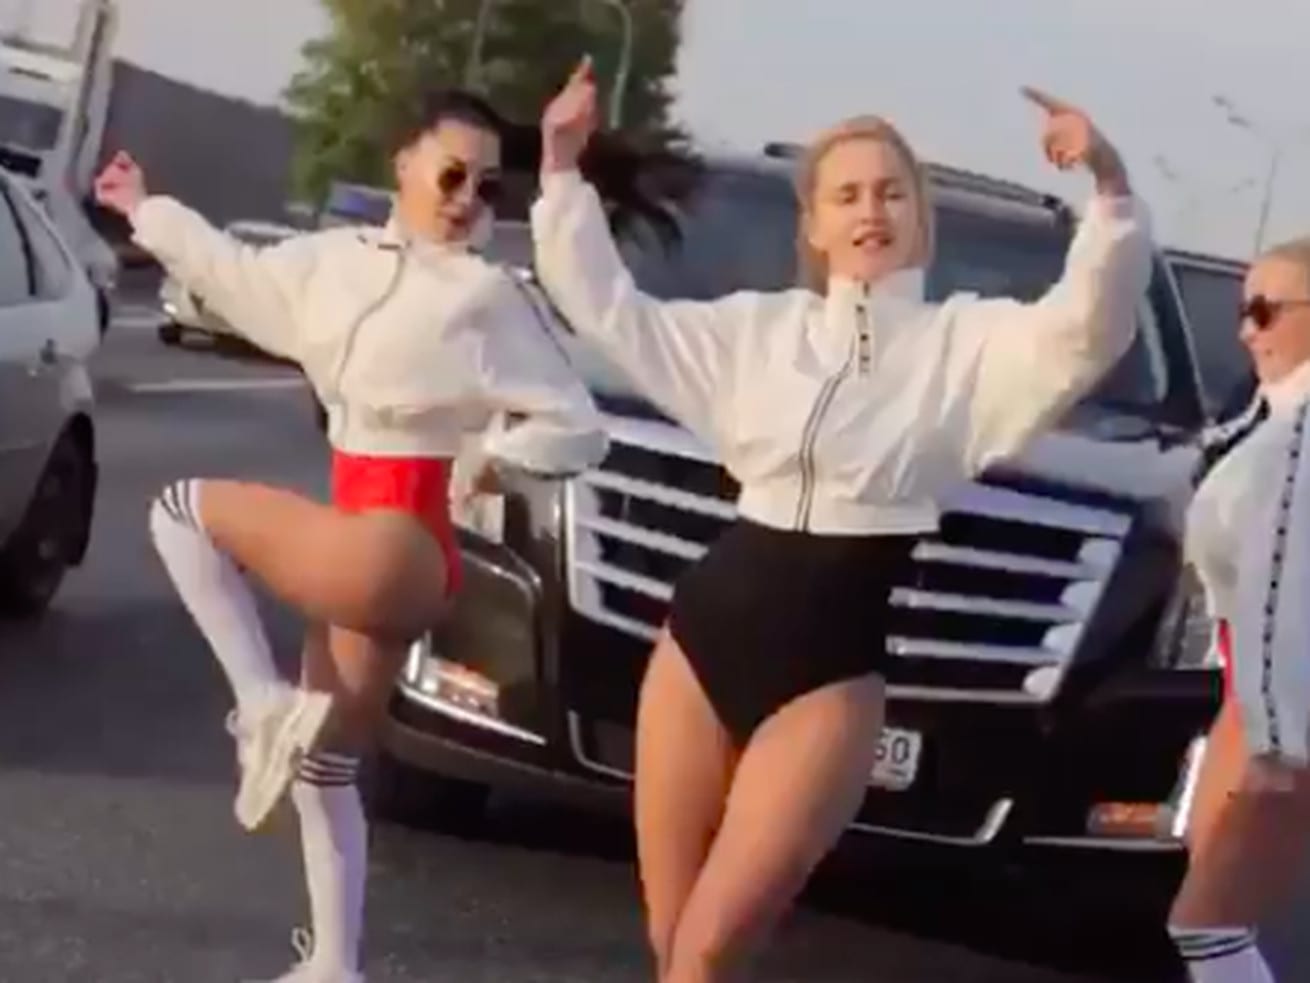 A Russian official is in trouble after his wife’s twerking caused a massive traffic jam